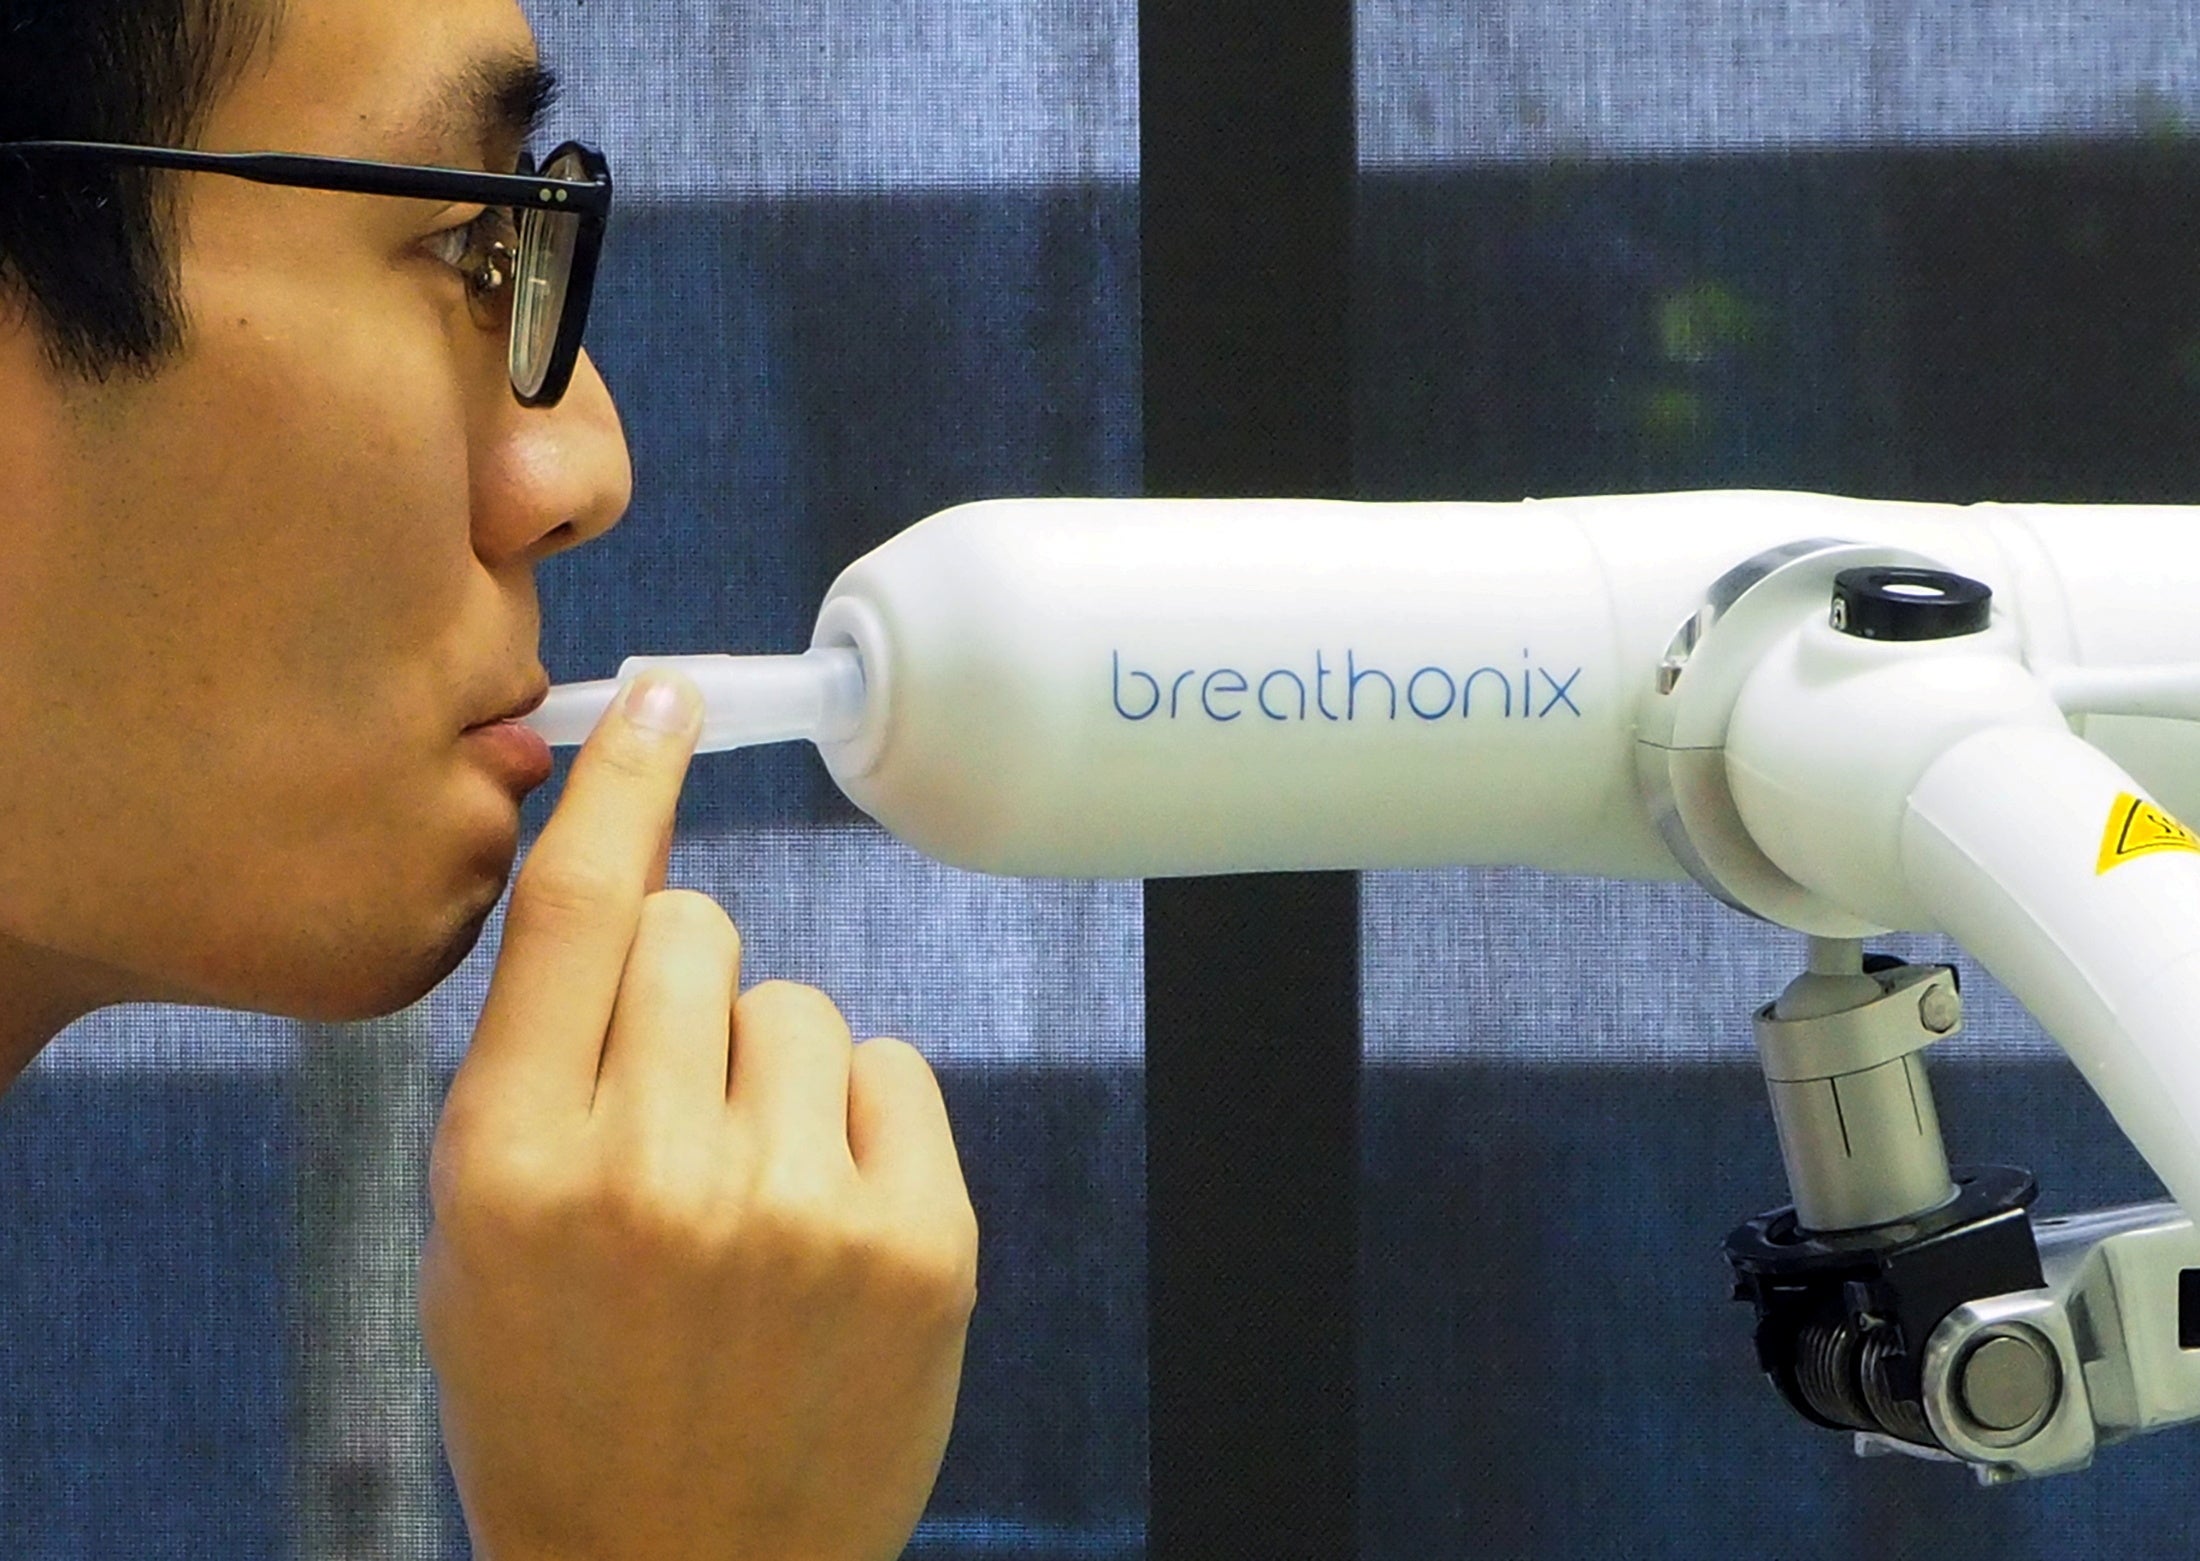 A staff member demonstrates the usage of Breathonix breathalyzer test at their laboratory in Singapore on 29 October, 2020